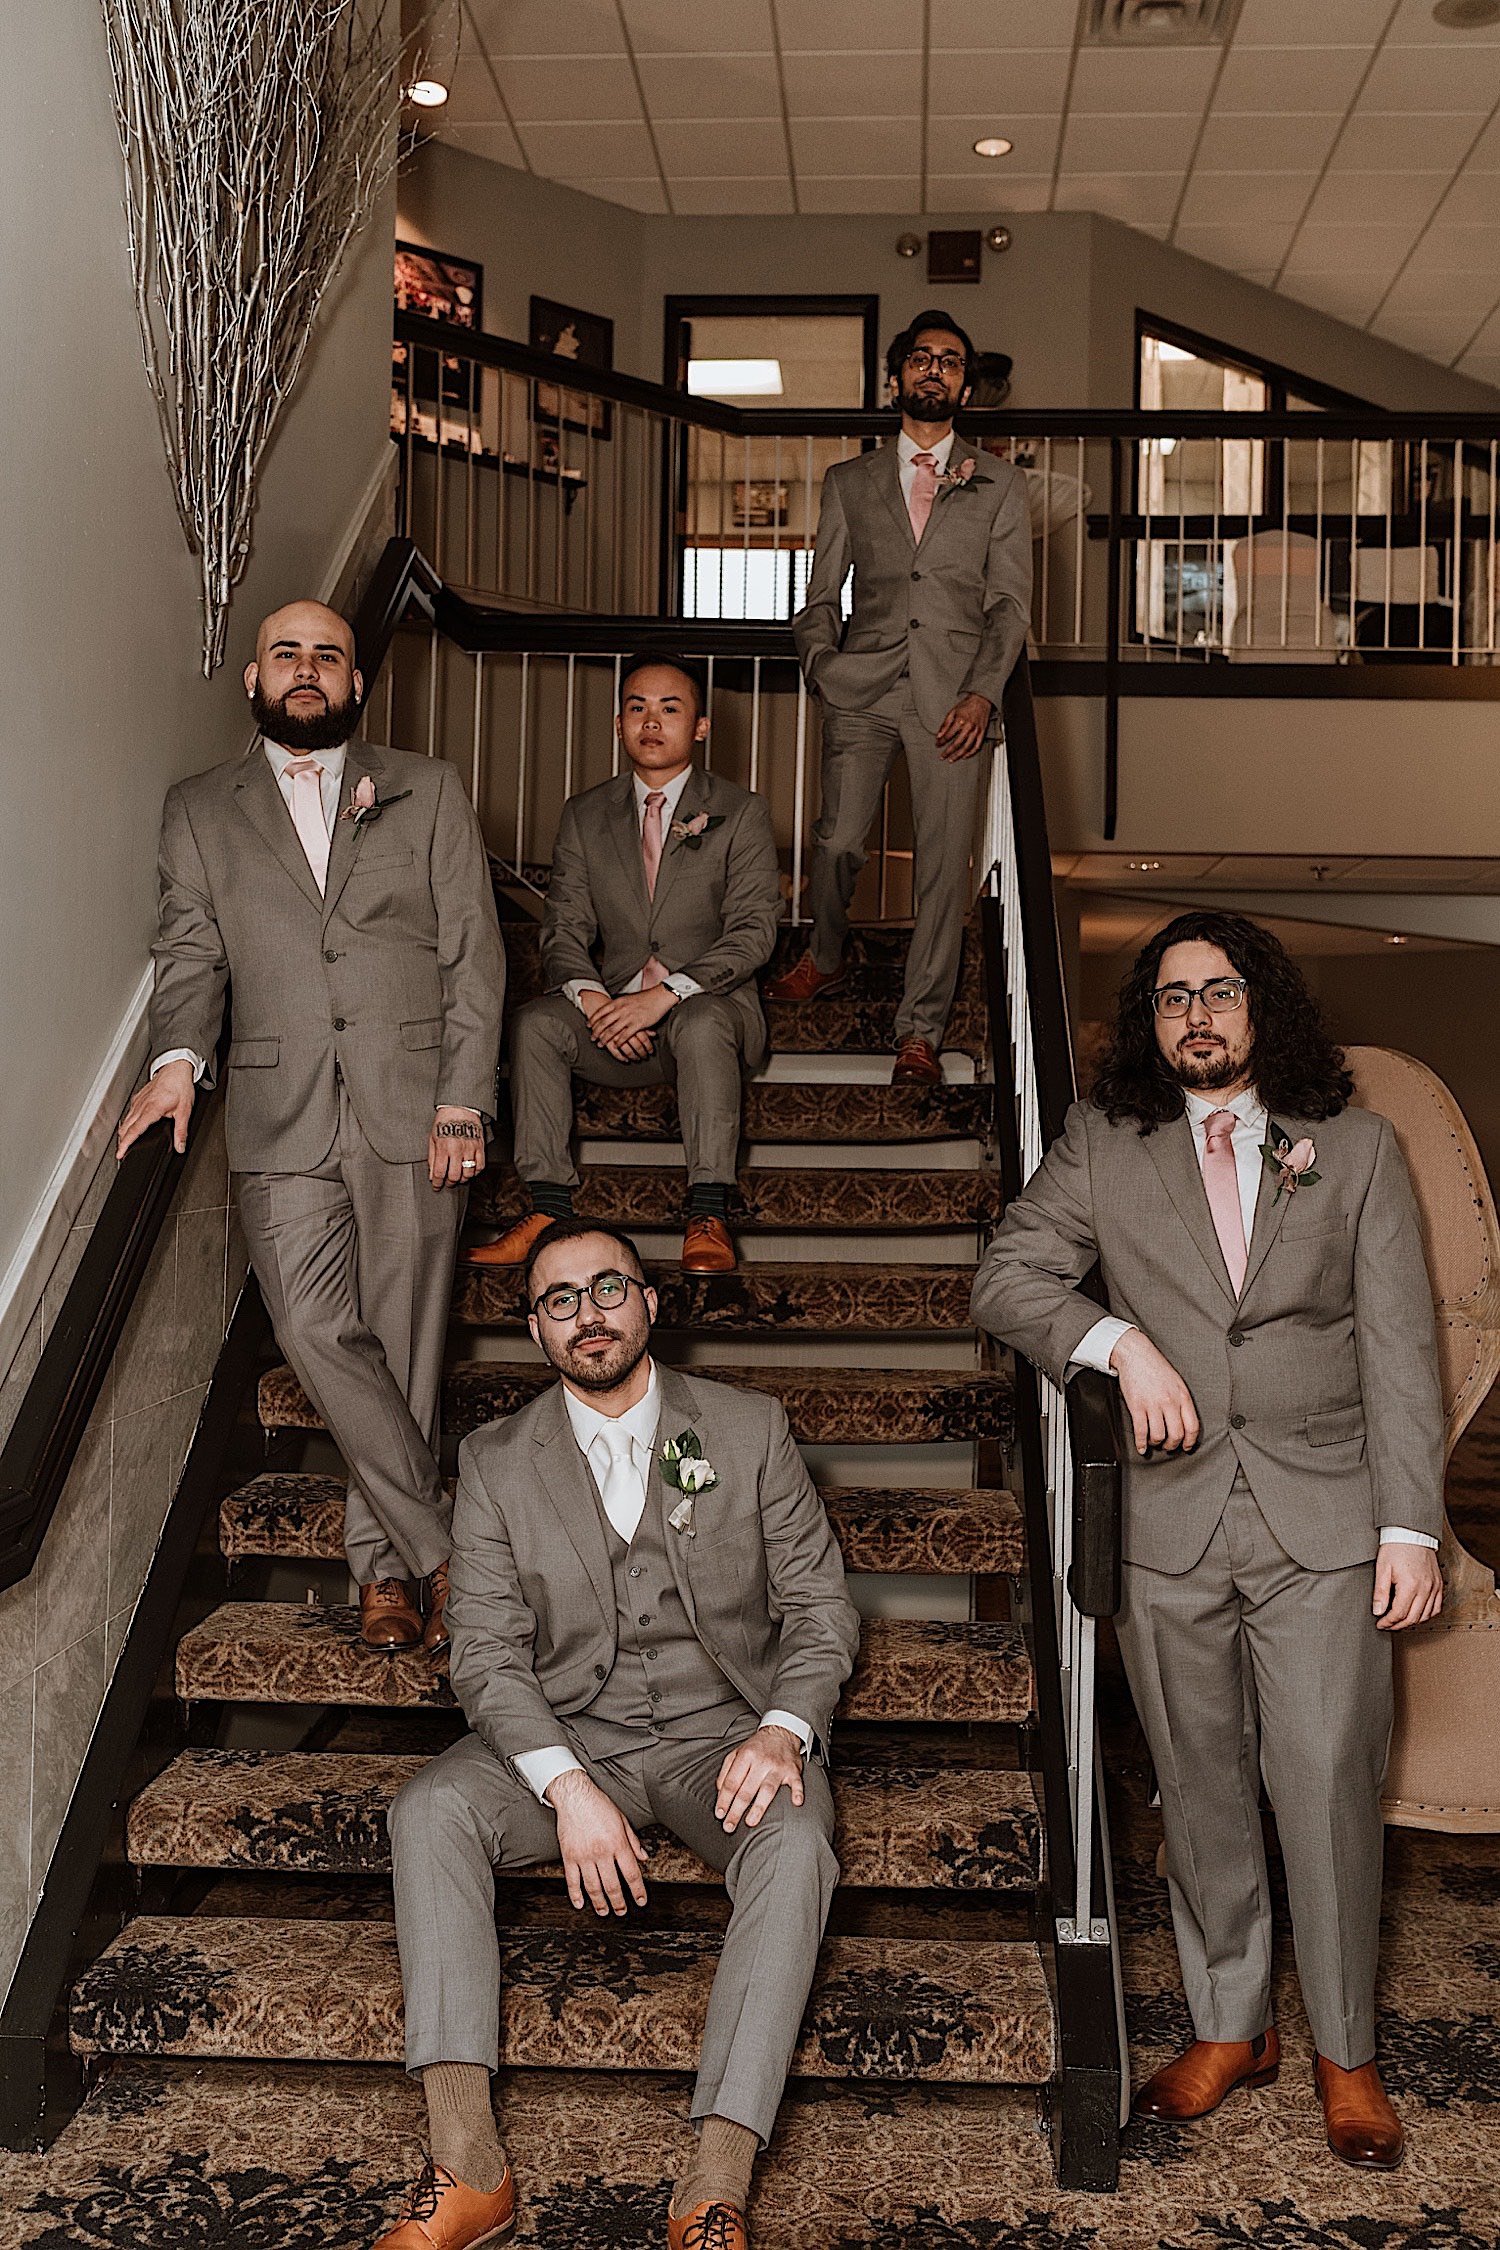 Groom poses on a staircase with his groomsmen around him